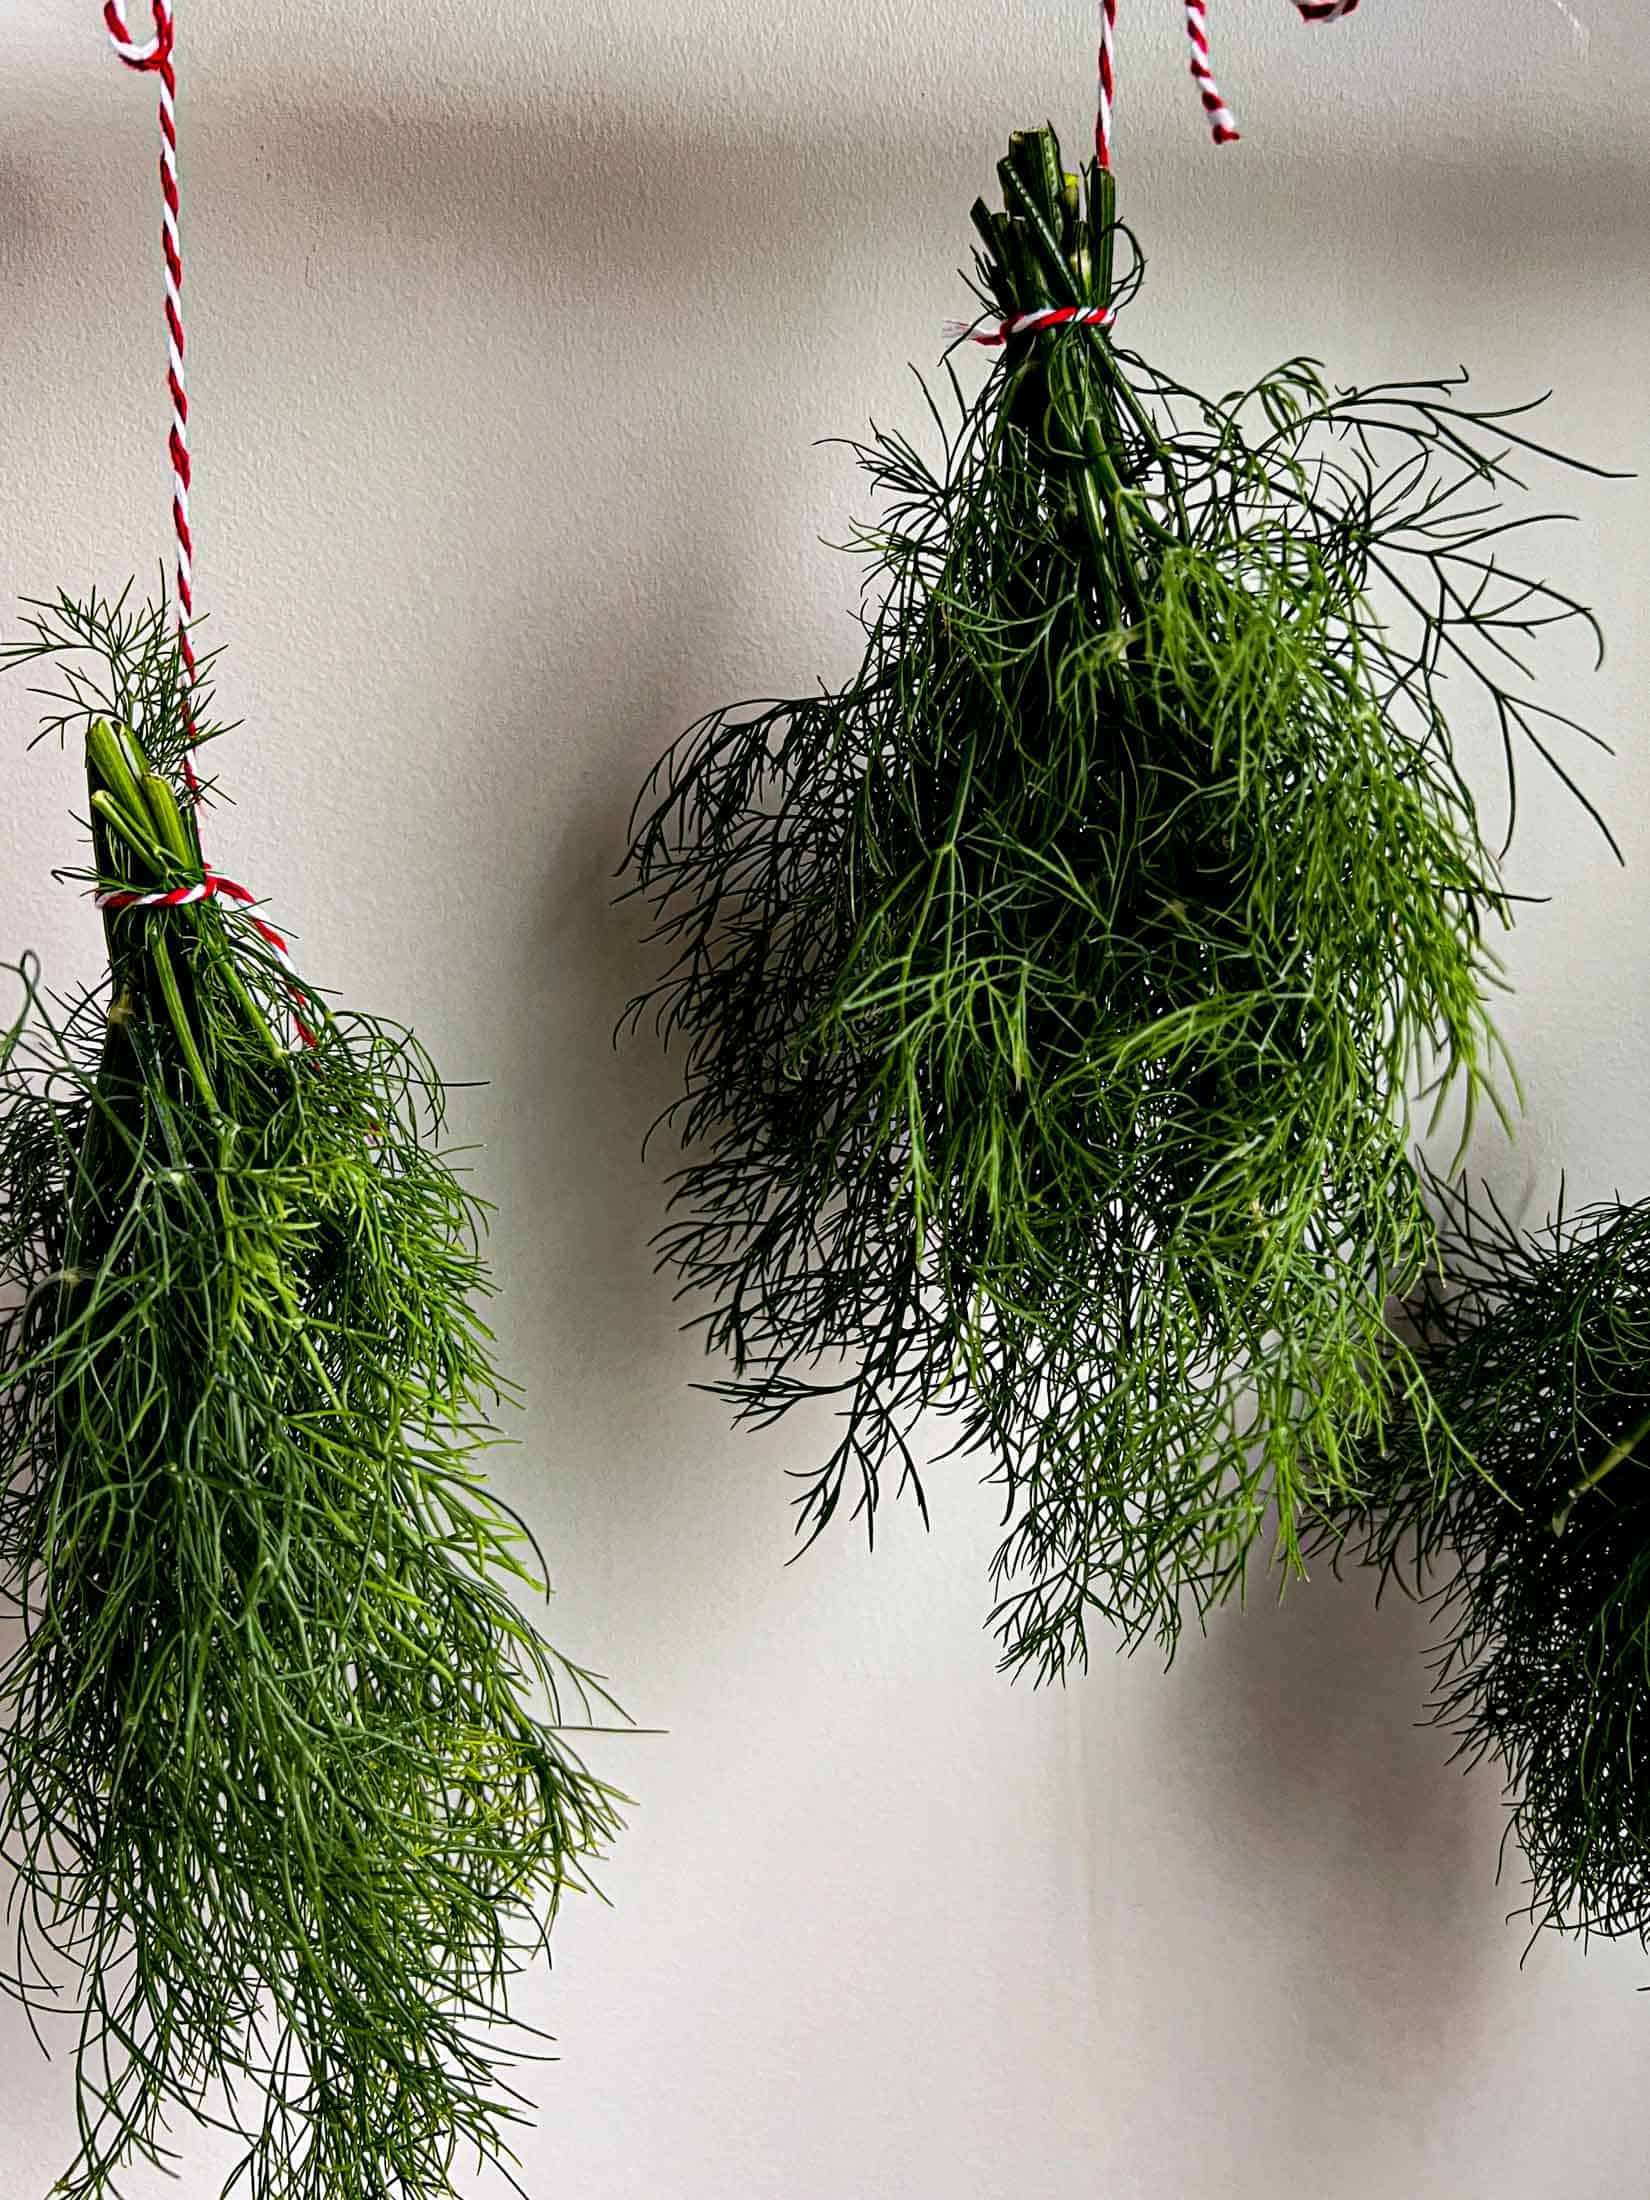 Dill hanging to air dry with red and white butcher's string.